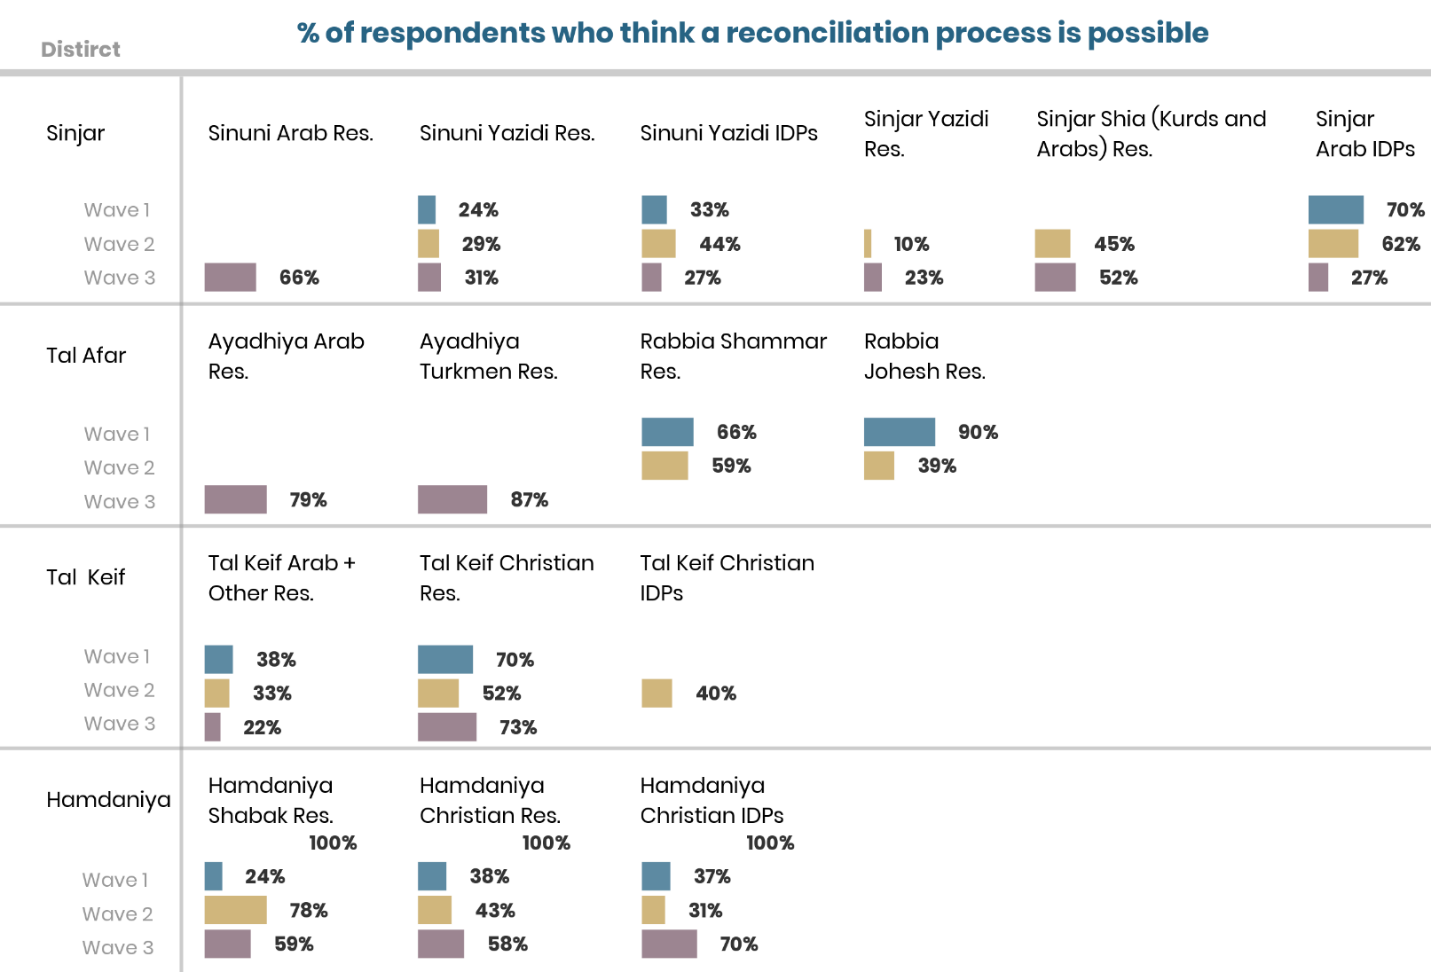 CSMF data shows that despite a belief in the need for reconciliation, many doubt that it is possible.